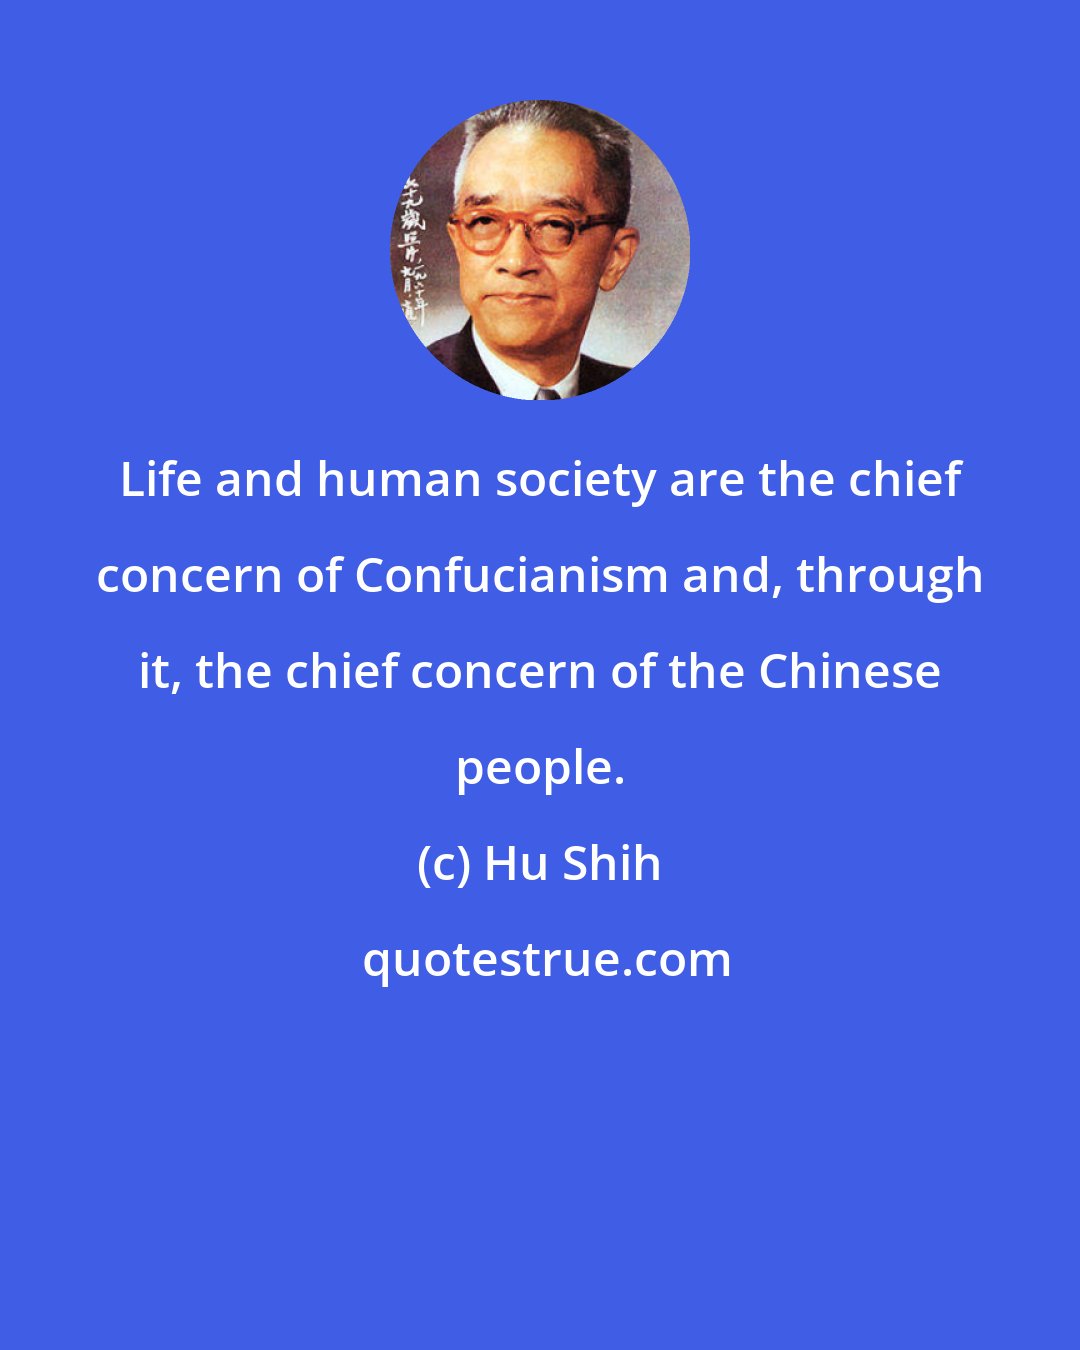 Hu Shih: Life and human society are the chief concern of Confucianism and, through it, the chief concern of the Chinese people.